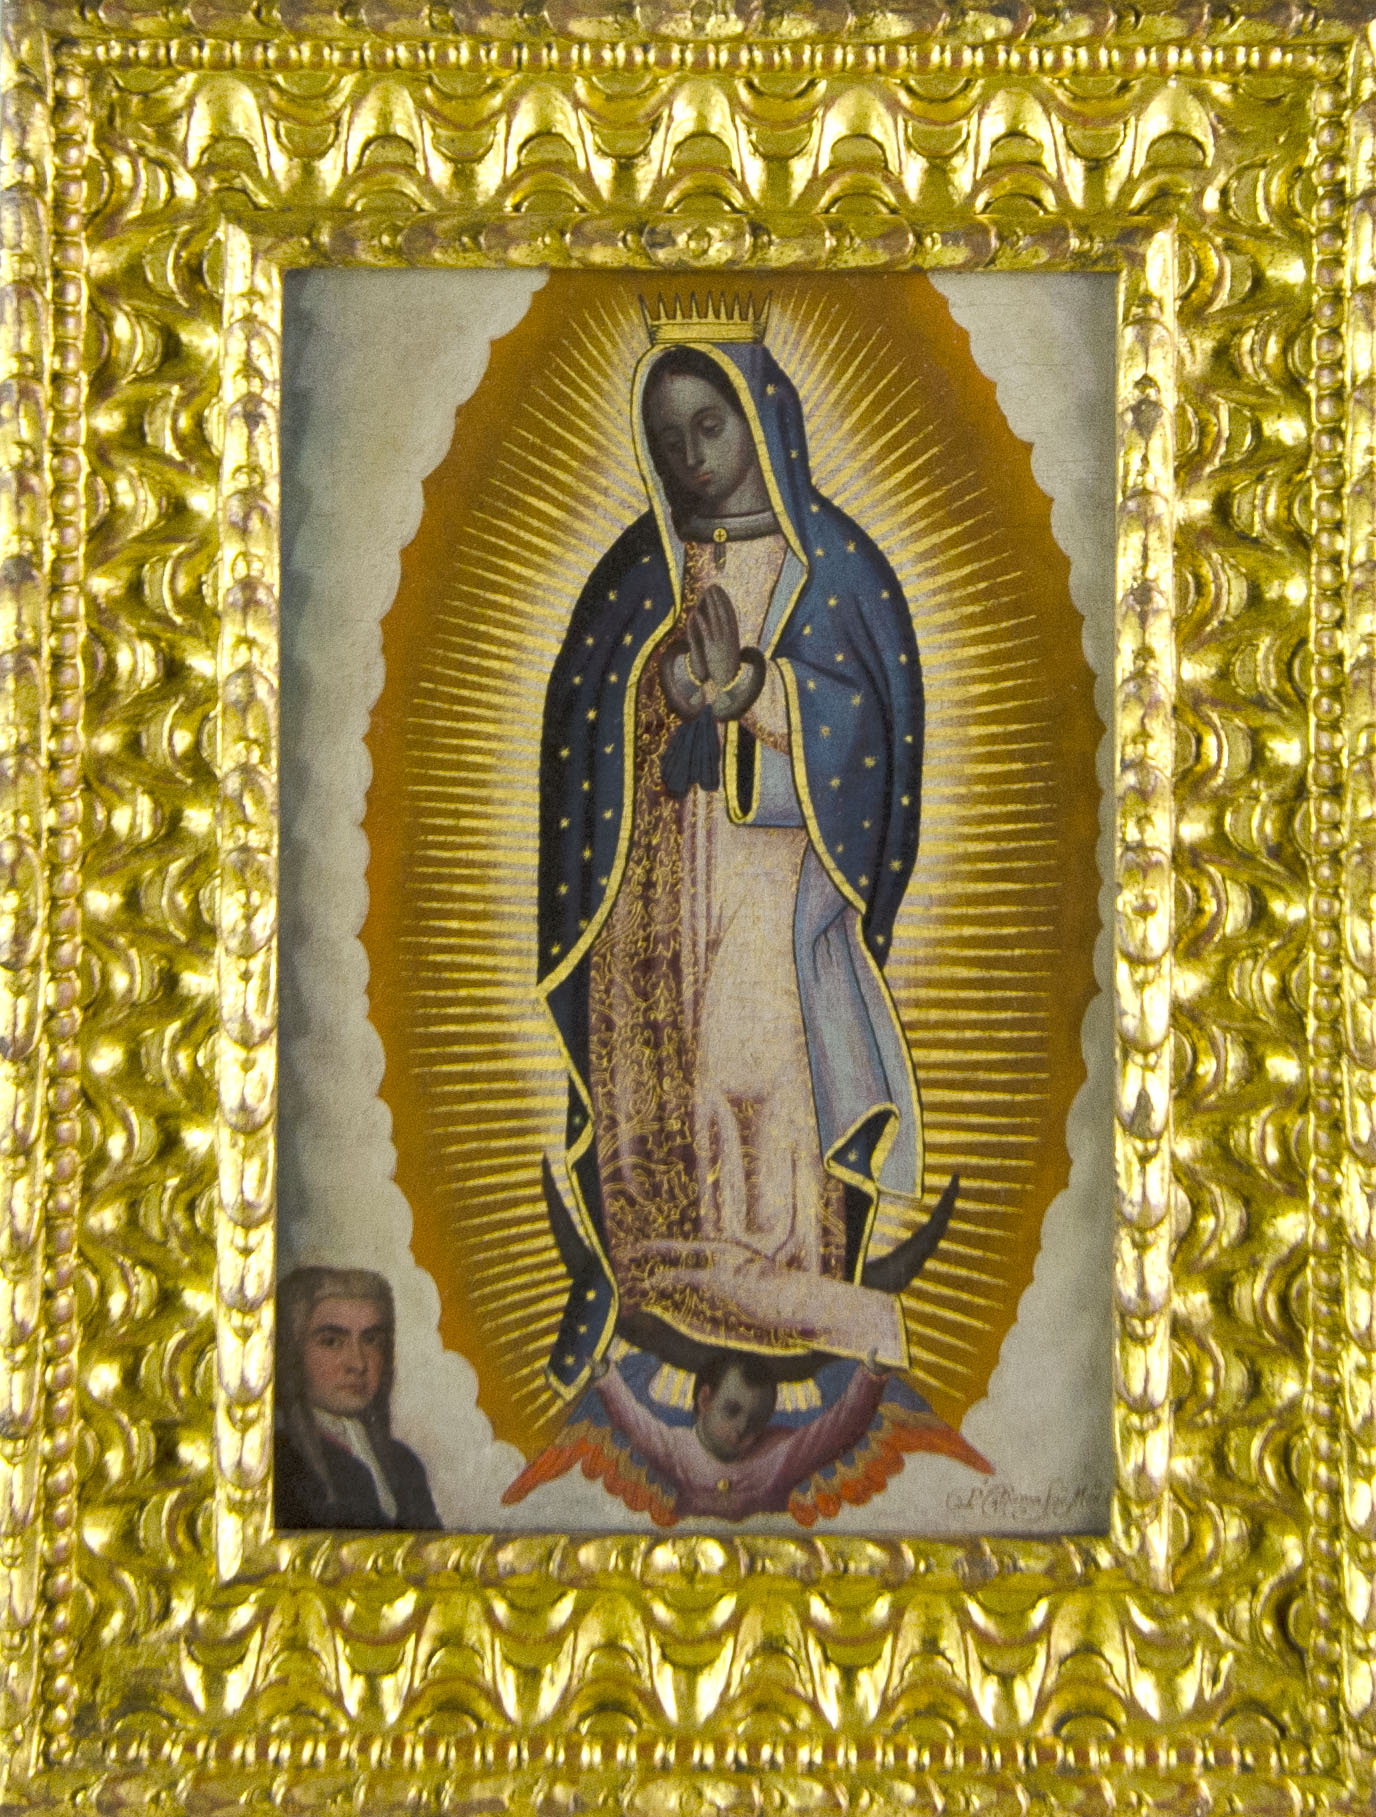 image of Guadalupe, man in bottom left corner. surrounded by thick gold frame